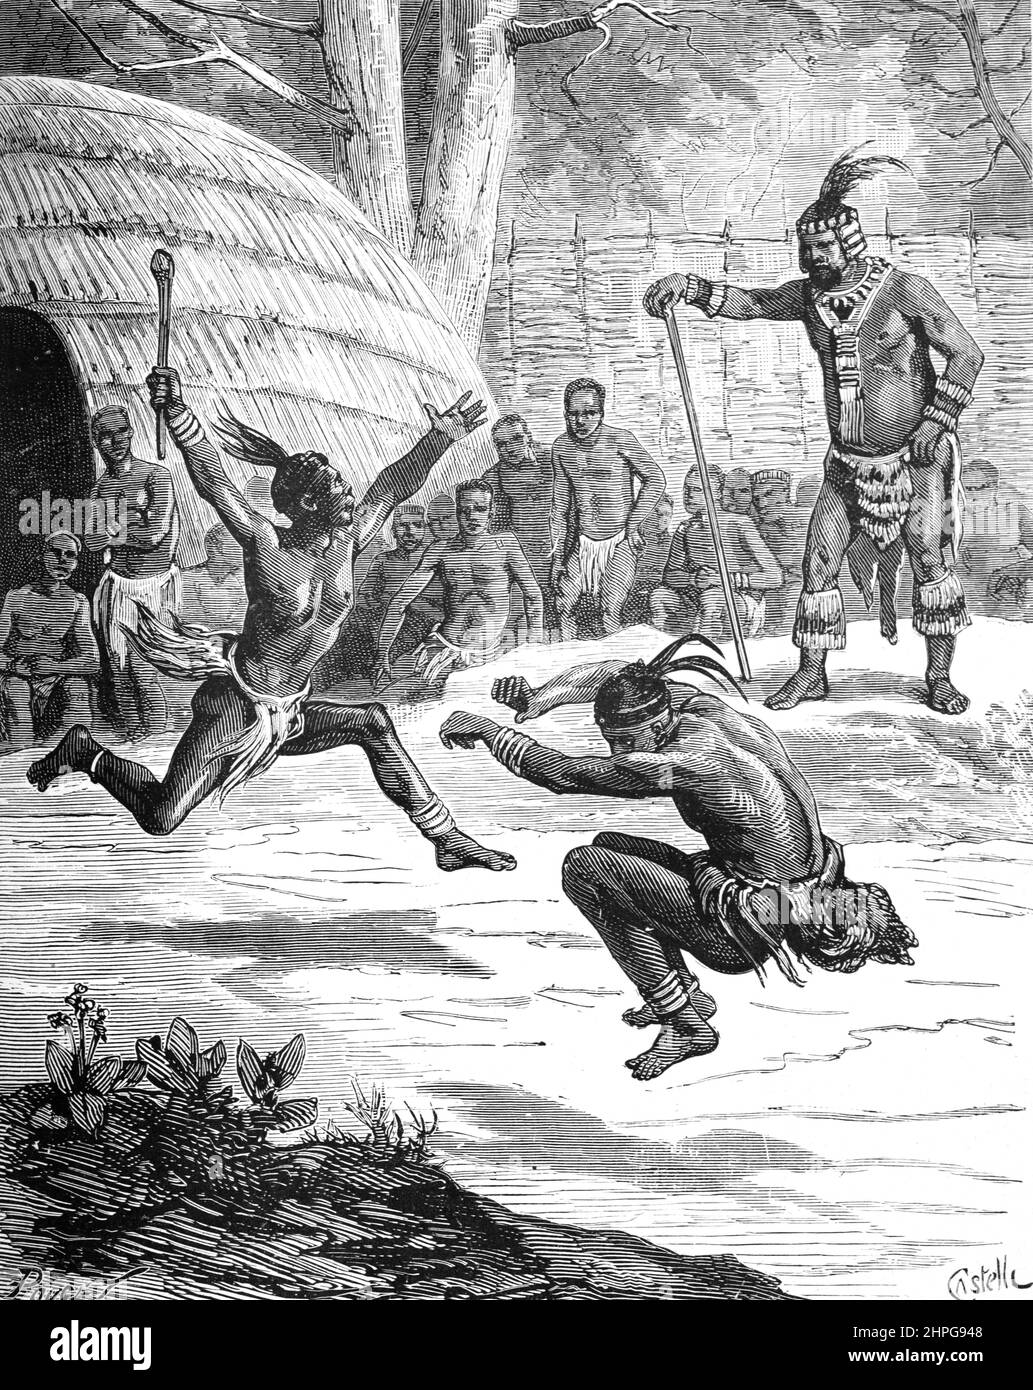 Zulu Village & Dancers in Southern or South Africa. Vintage Illustration or Engraving 1879 (Castelli) Stock Photo